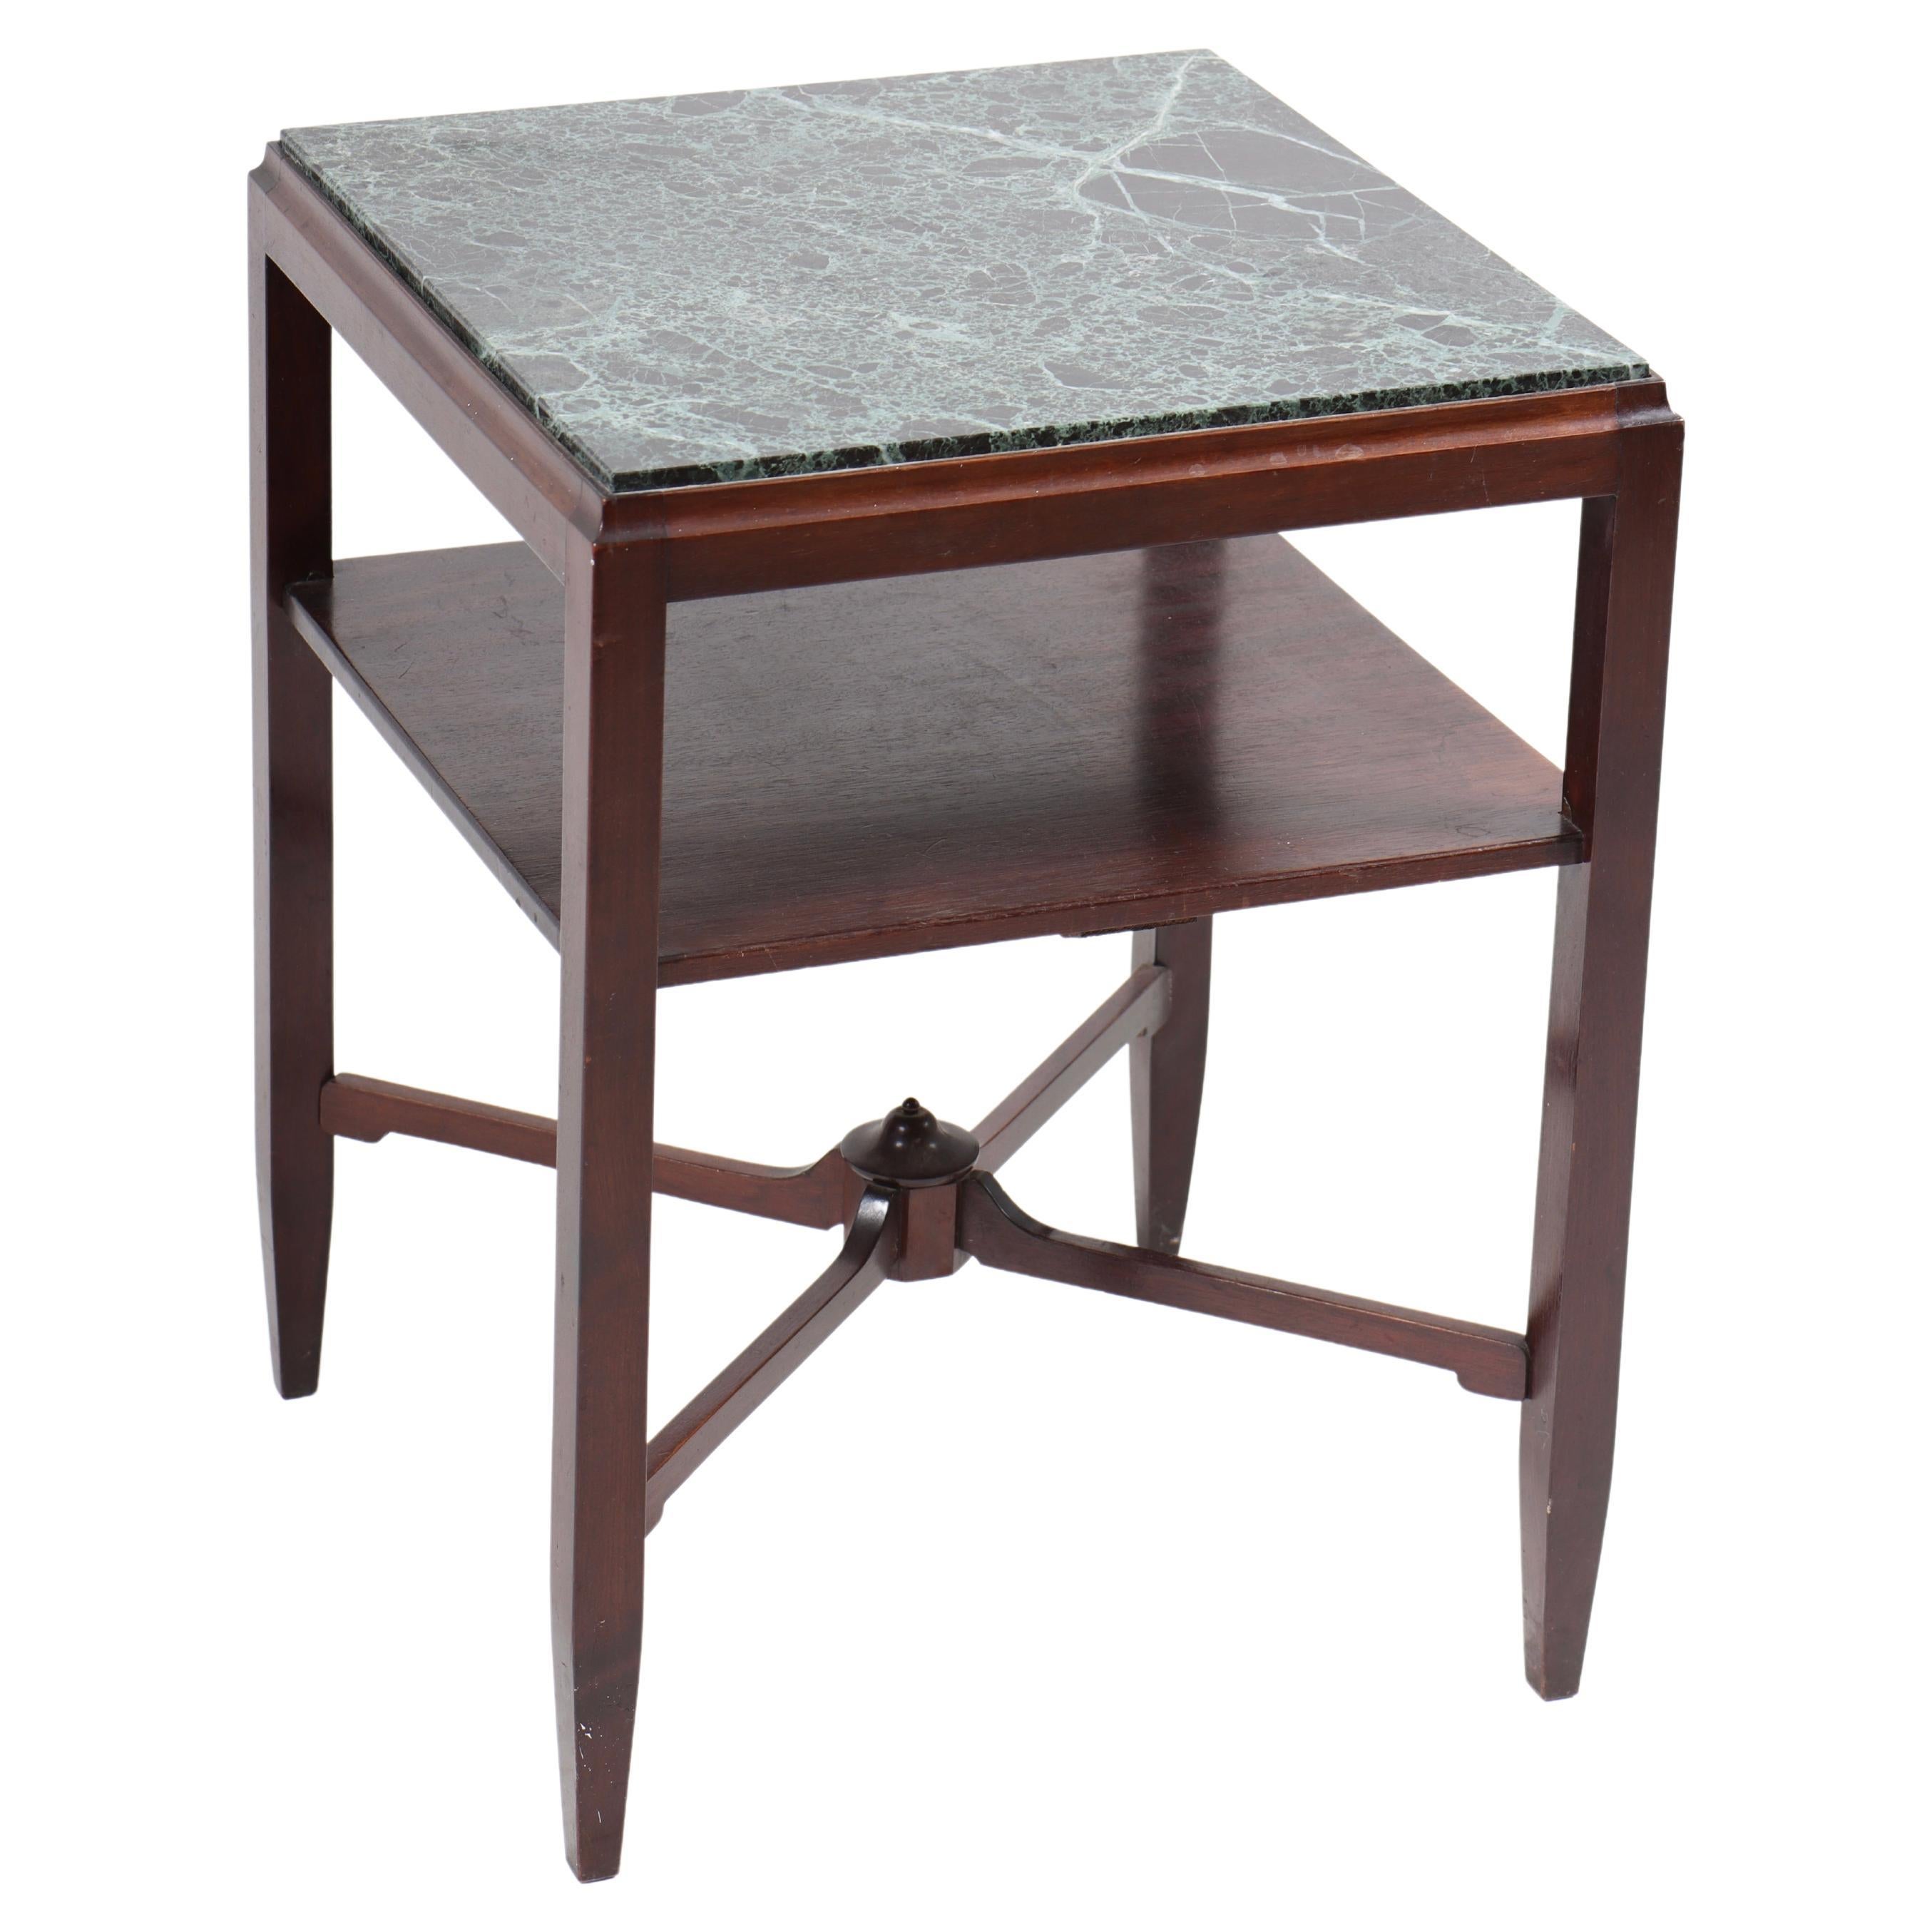 Low Table in Mahogany and Marble, Made in Denmark, 1930s